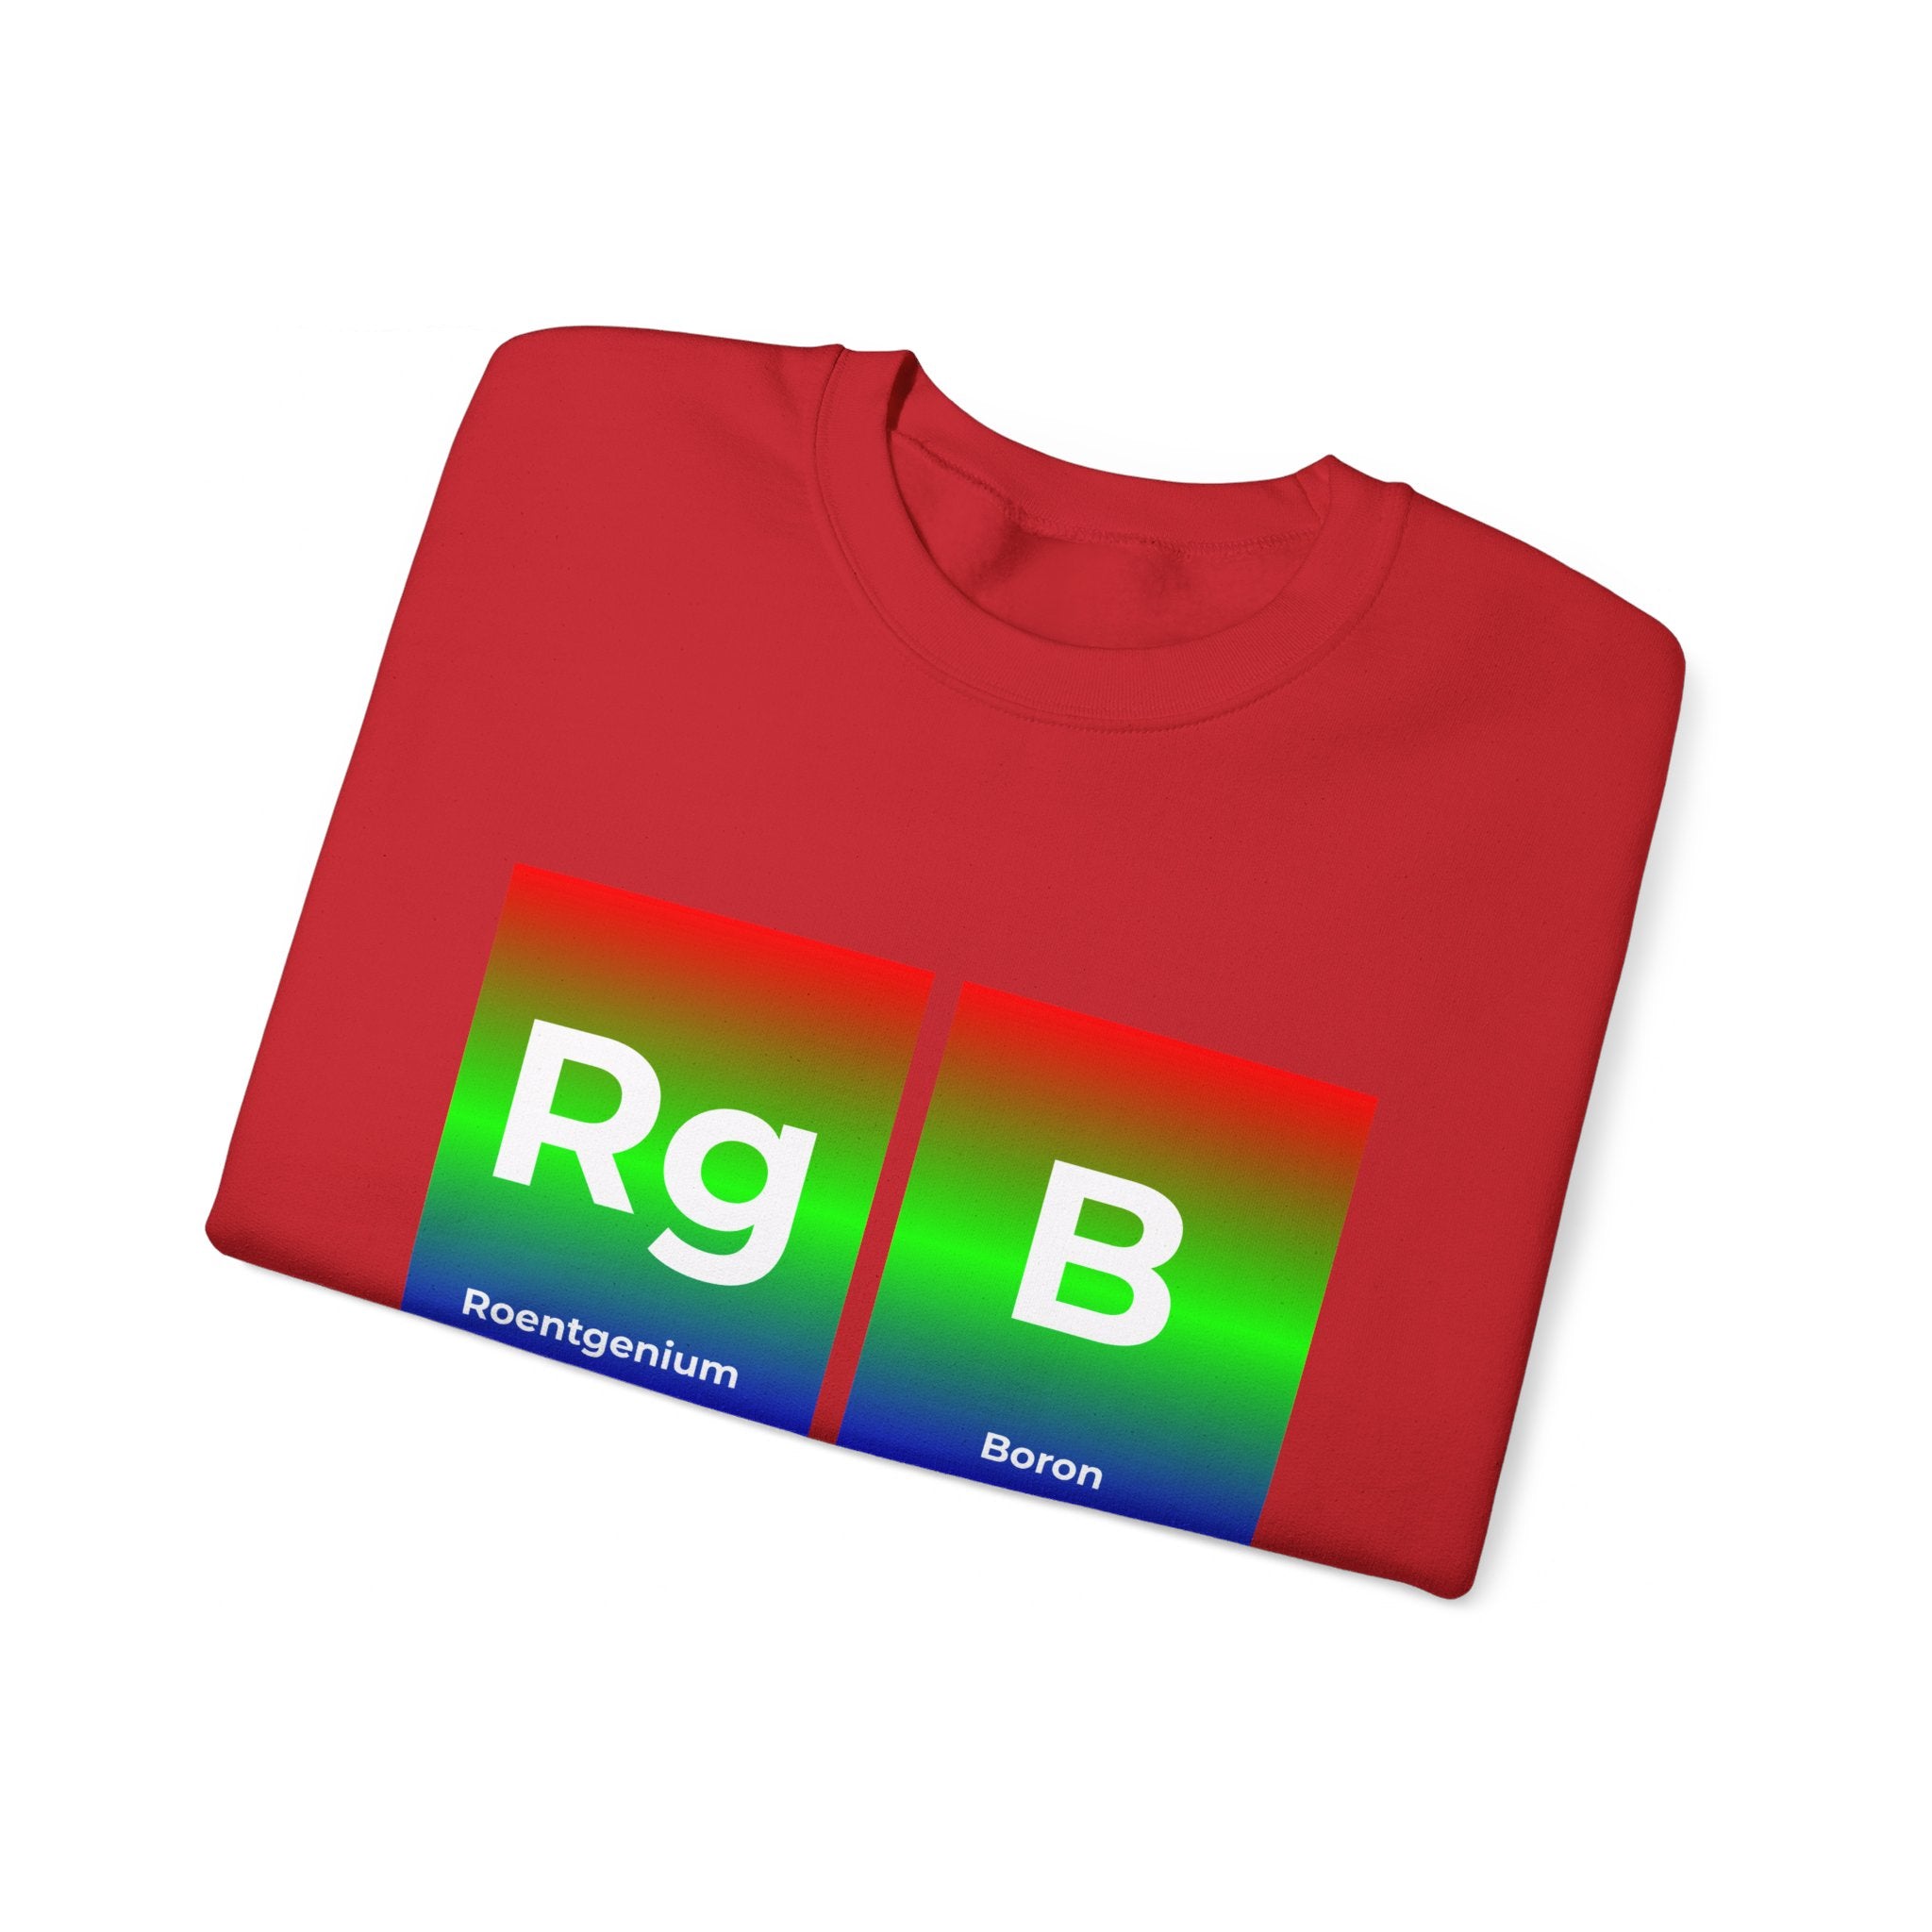 A folded red t-shirt features a periodic table-inspired design with "Rg" for Roentgenium and "B" for Boron, each with colorful gradients. This stylish RG-B - Sweatshirt is both cozy and eye-catching.